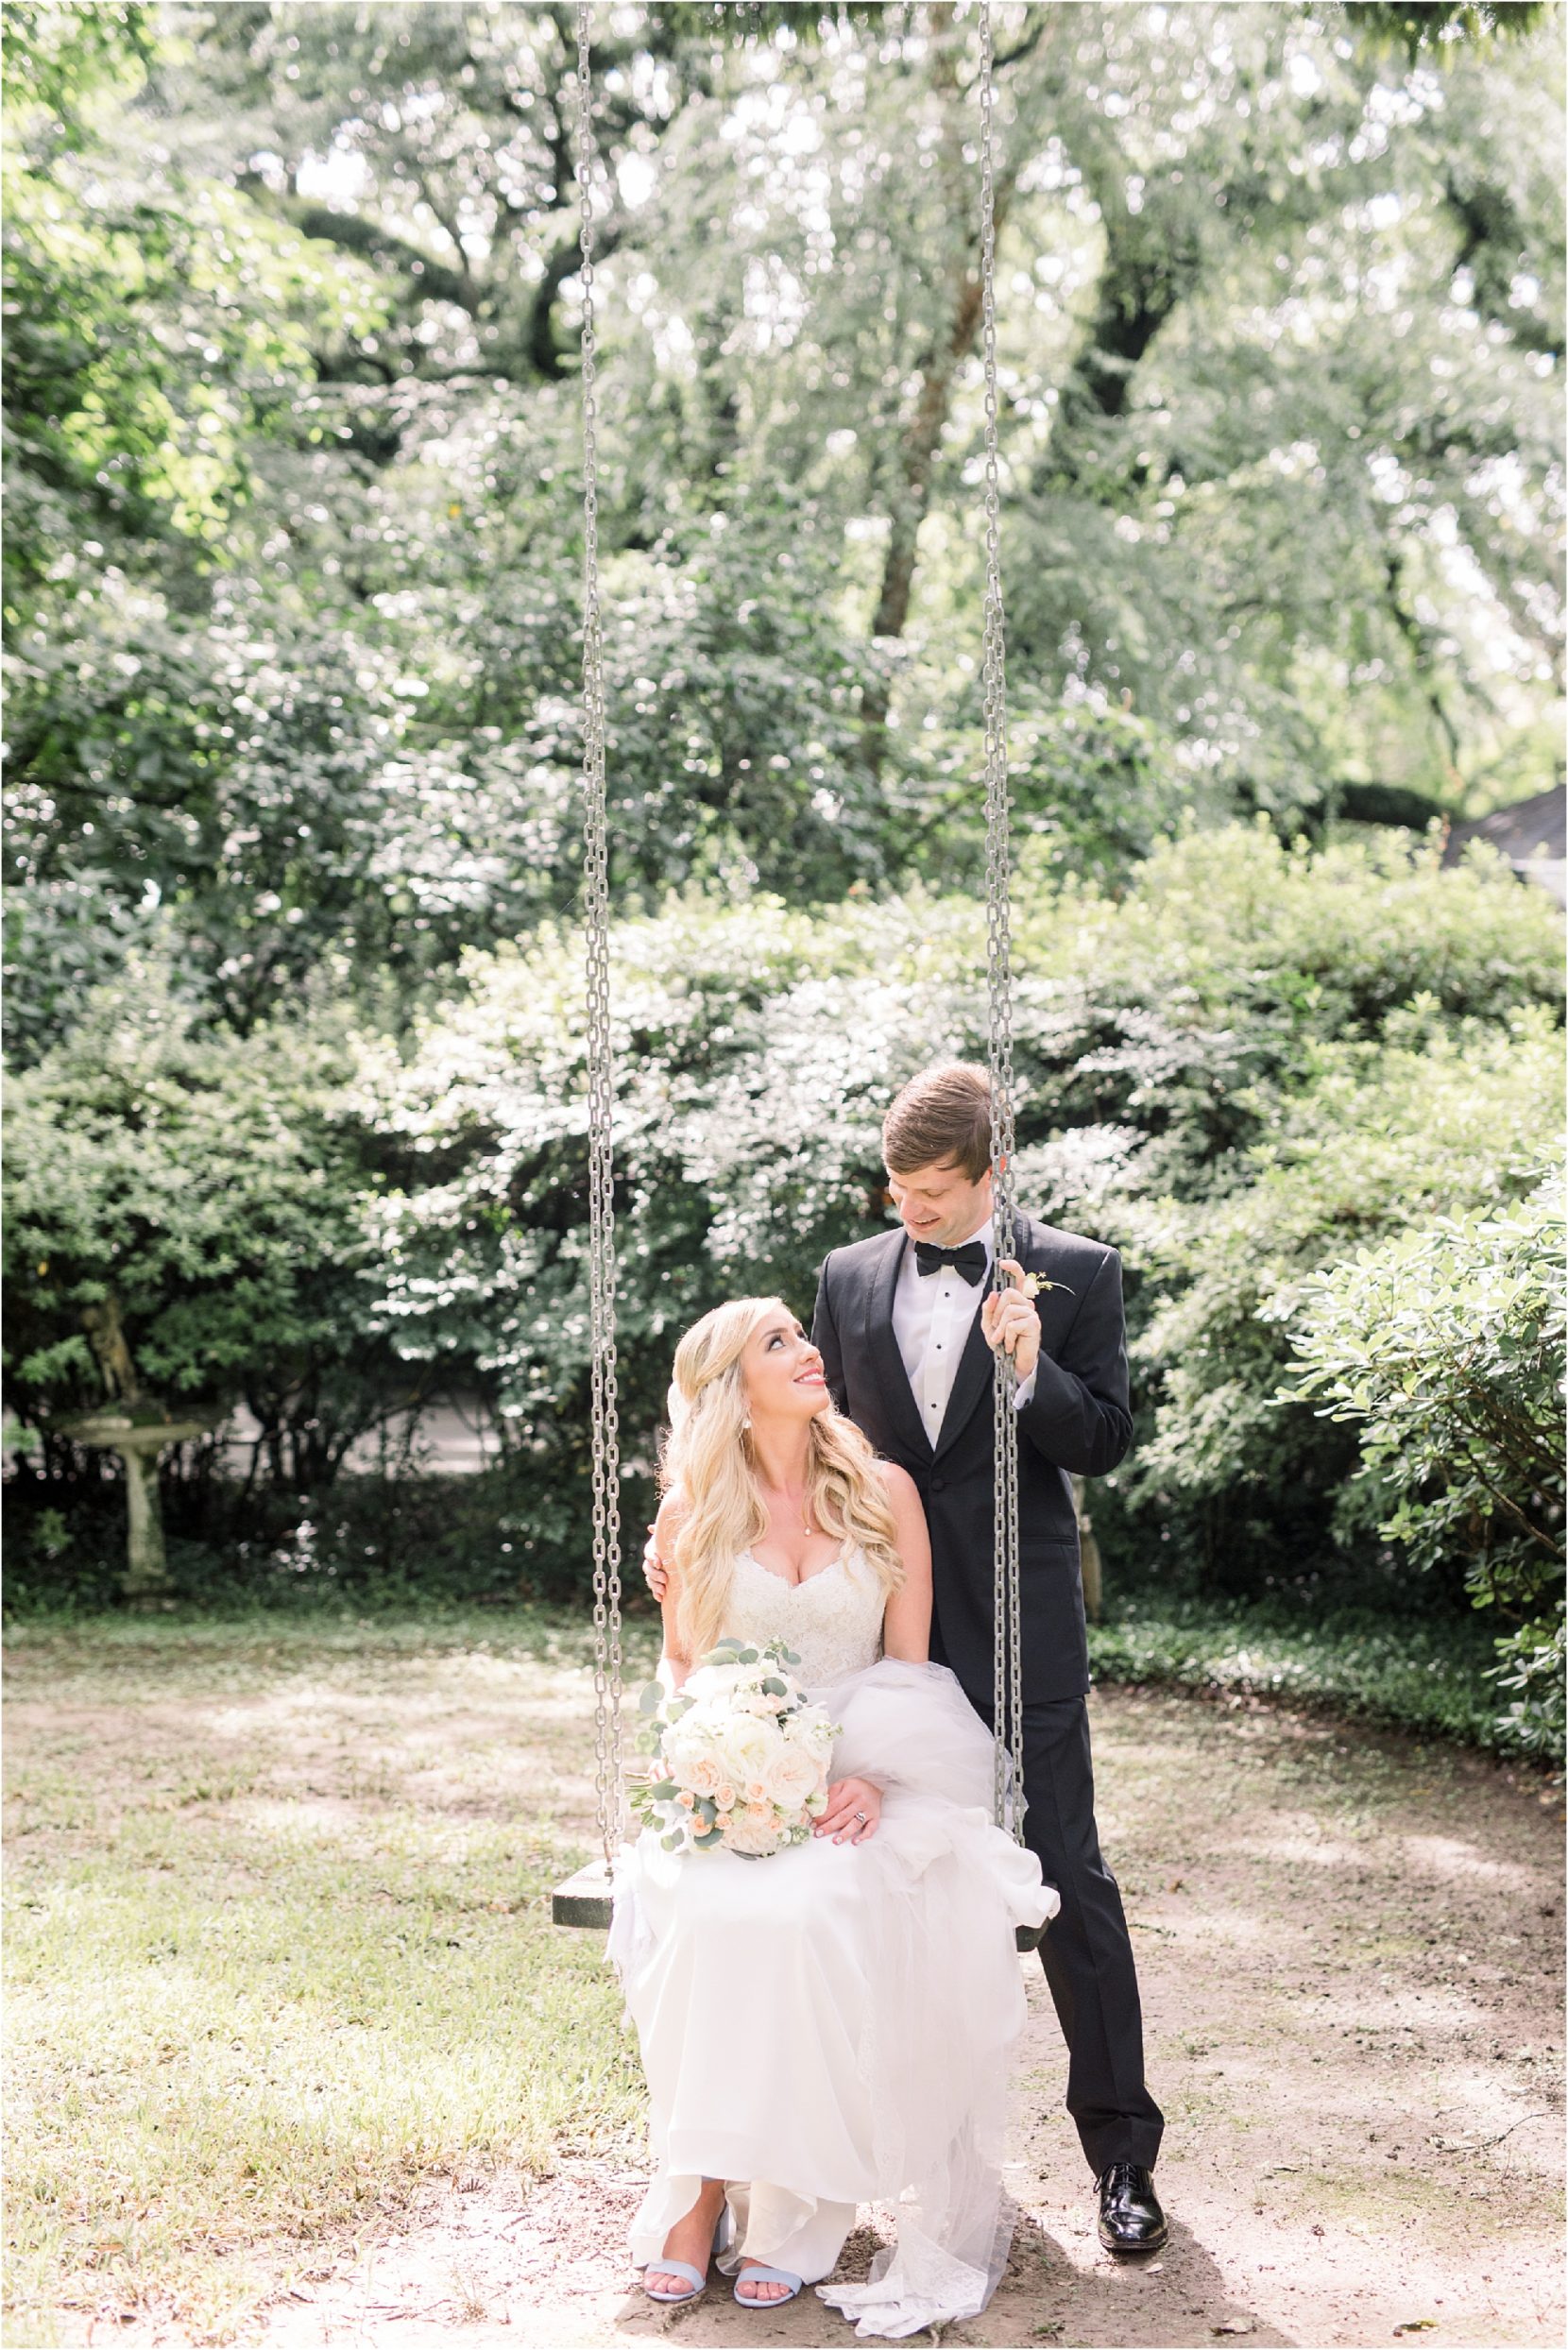 Mobile Alabama Wedding Photographer Jennie Tewell Photographer Cathedral of Immaculate Conception Richards DAR House Alabama Wedding Photographer 0013